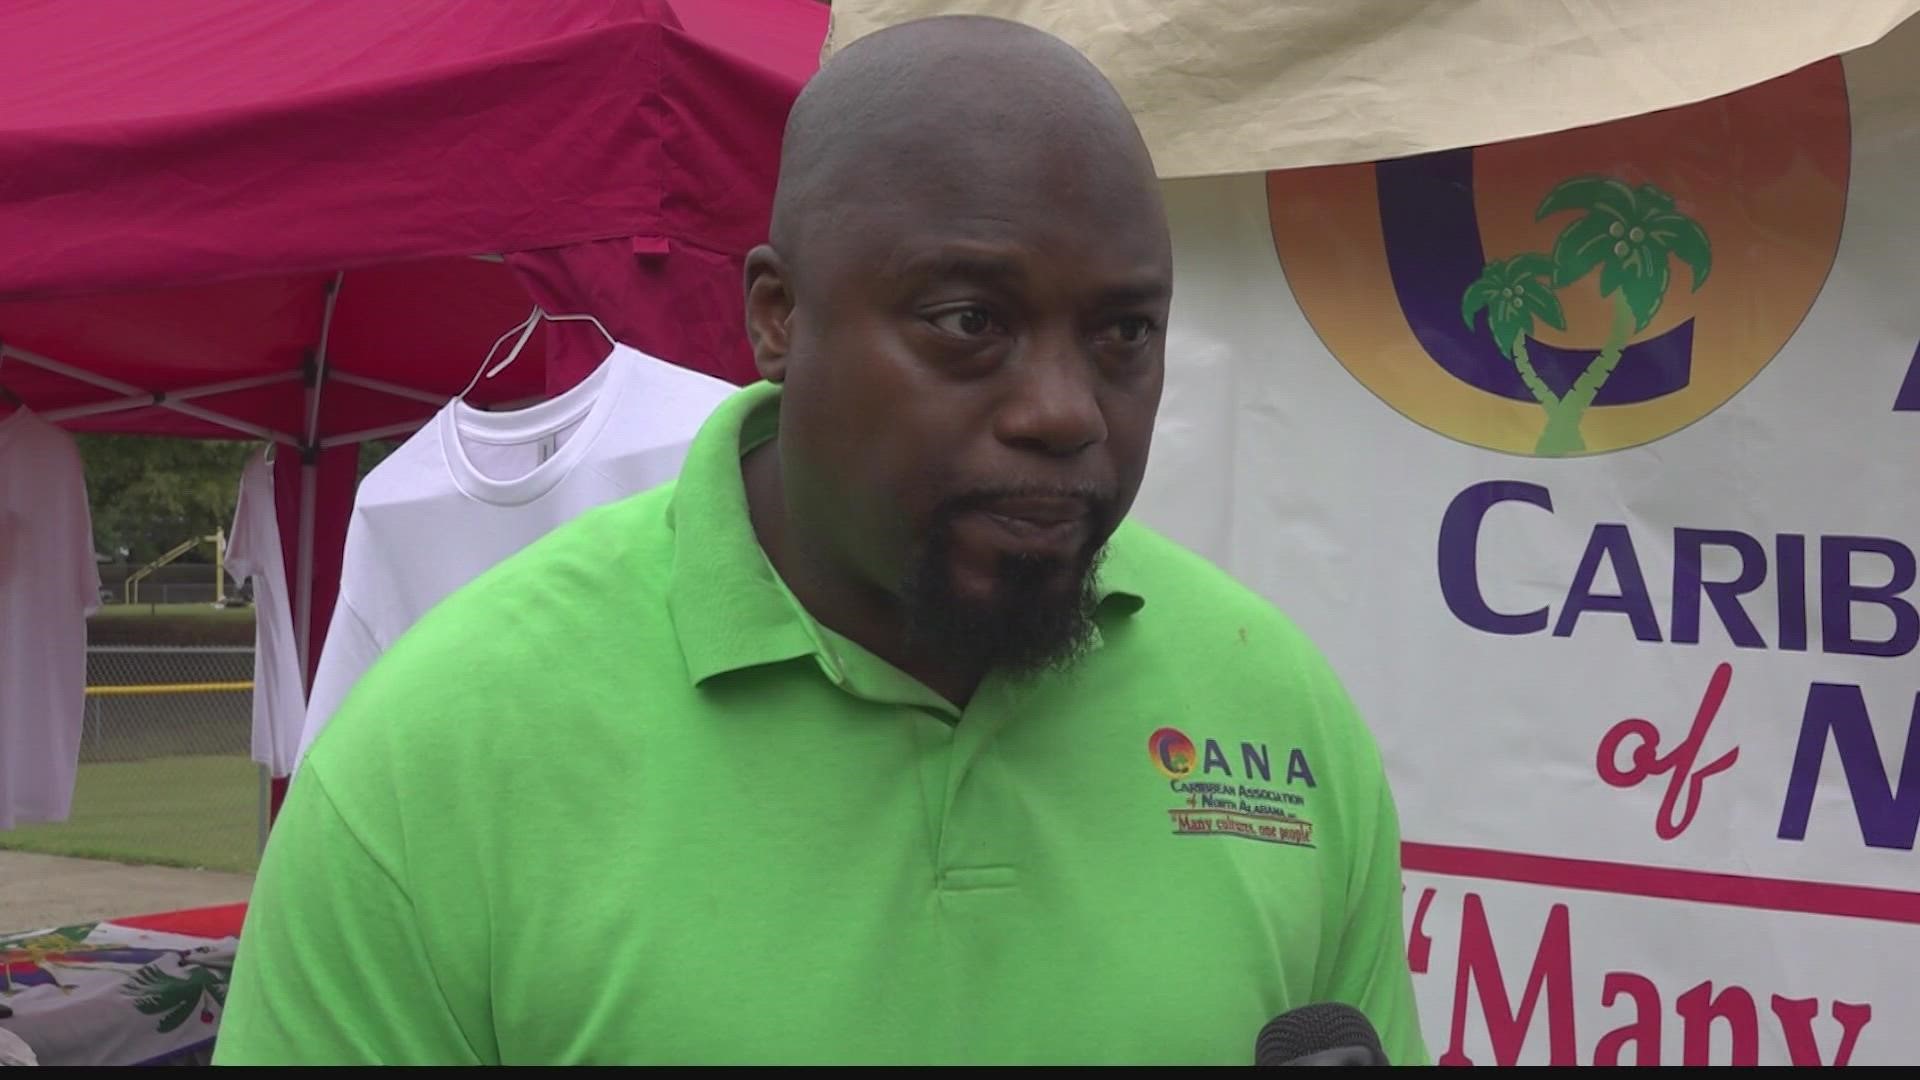 The Caribbean Association of North Alabama came back with their "Caribbean Day at the Park" today, after taking two years off since the pandemic.